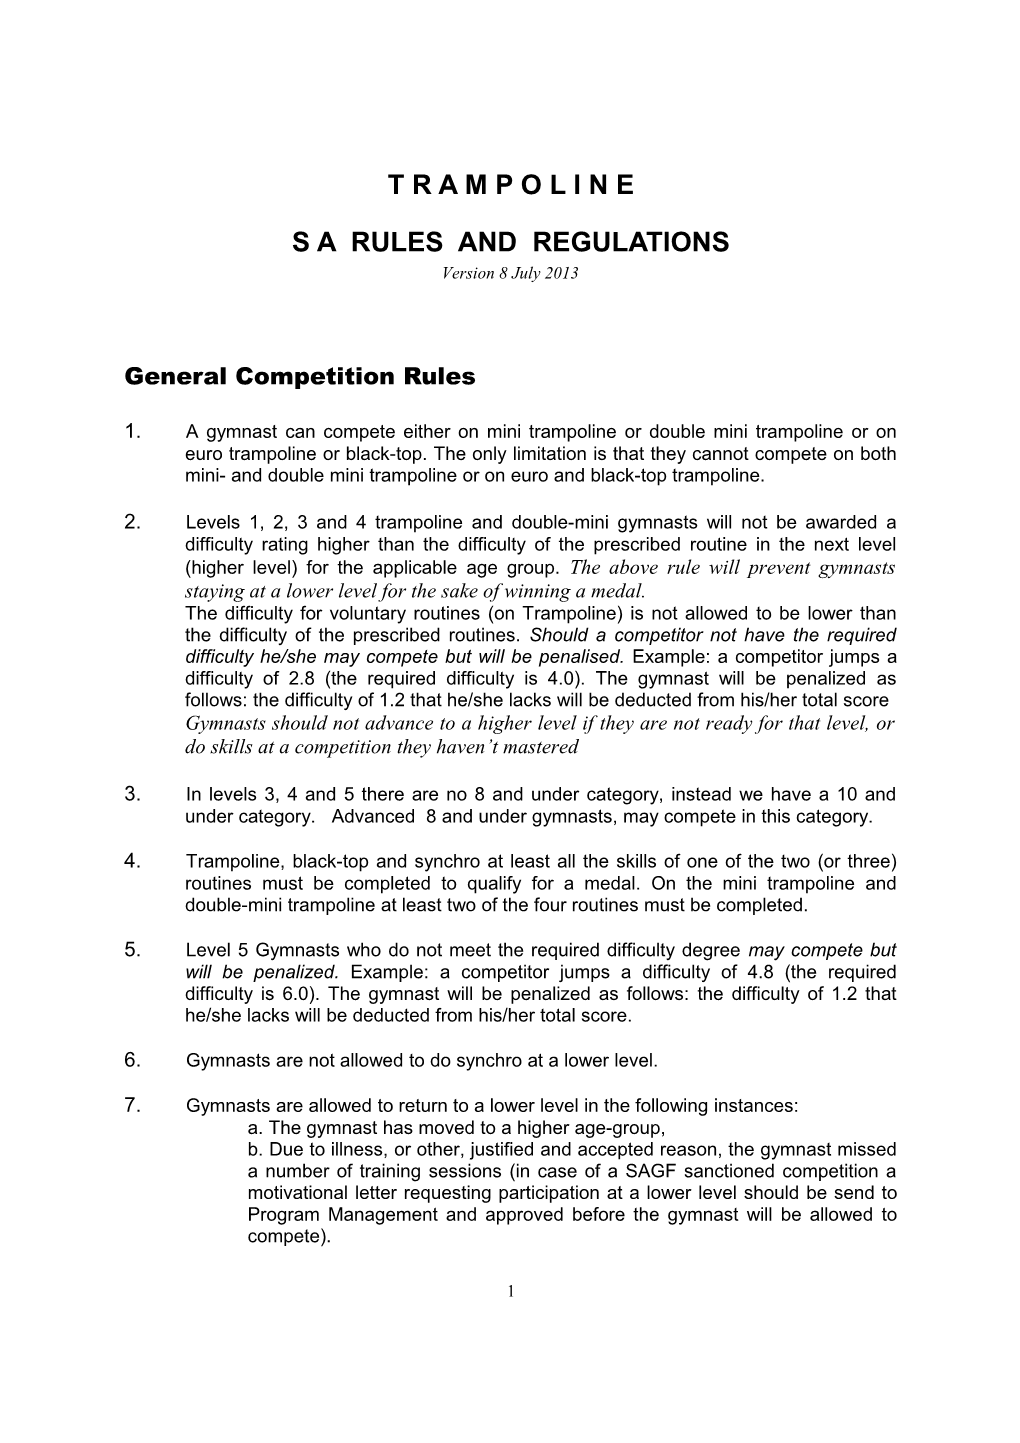 S a Rules and Regulations